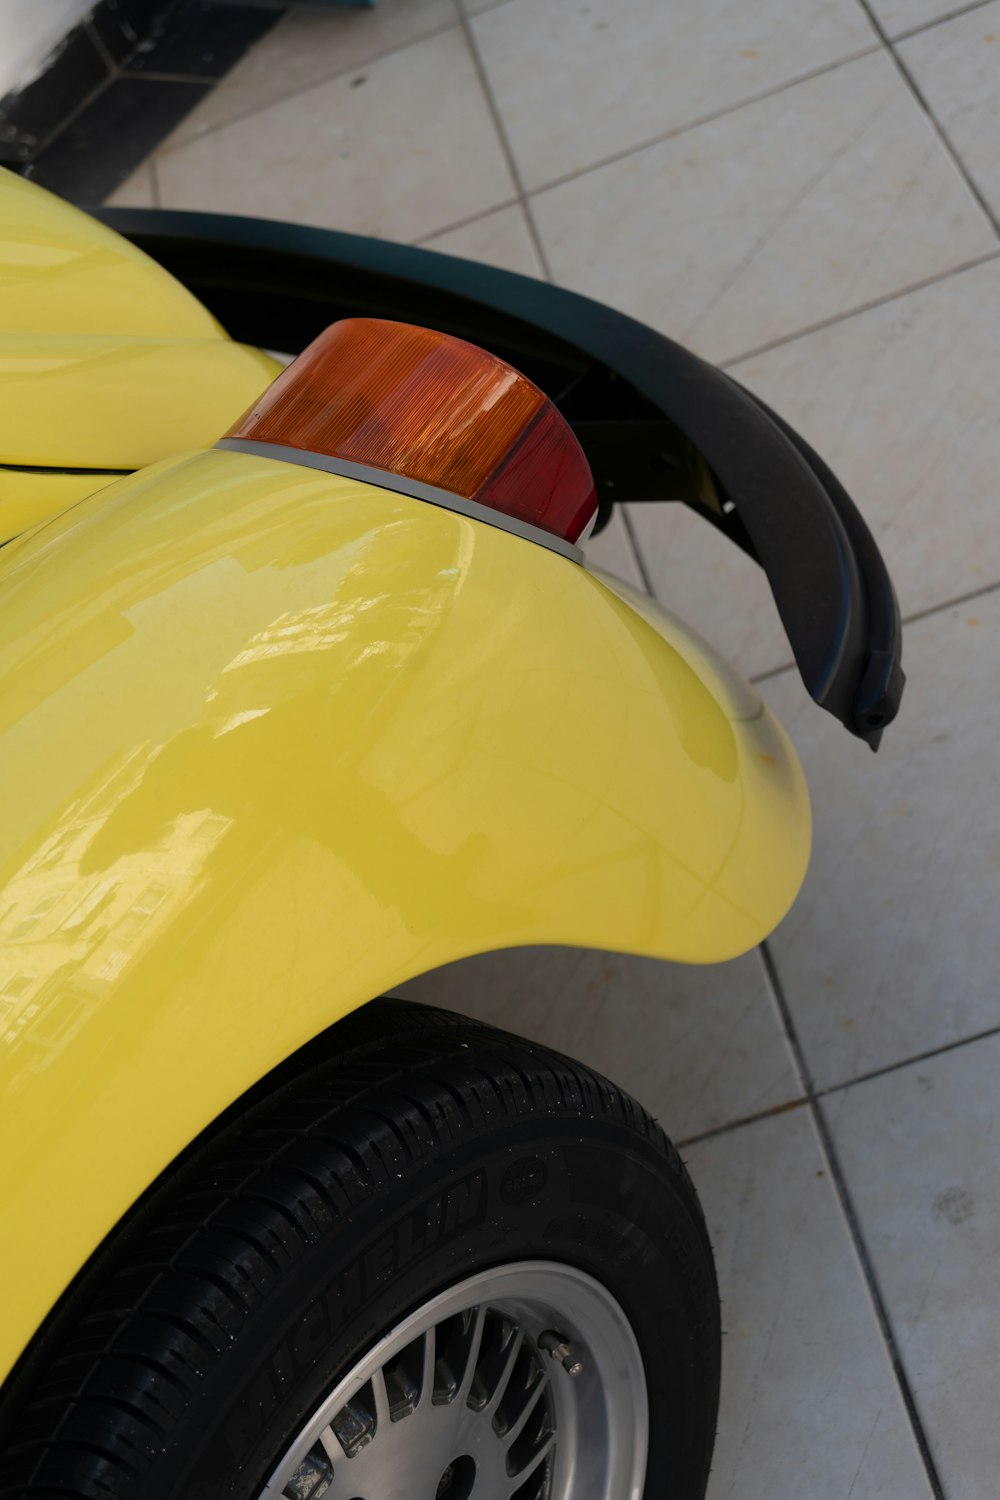 a close up of a yellow car on a tile floor